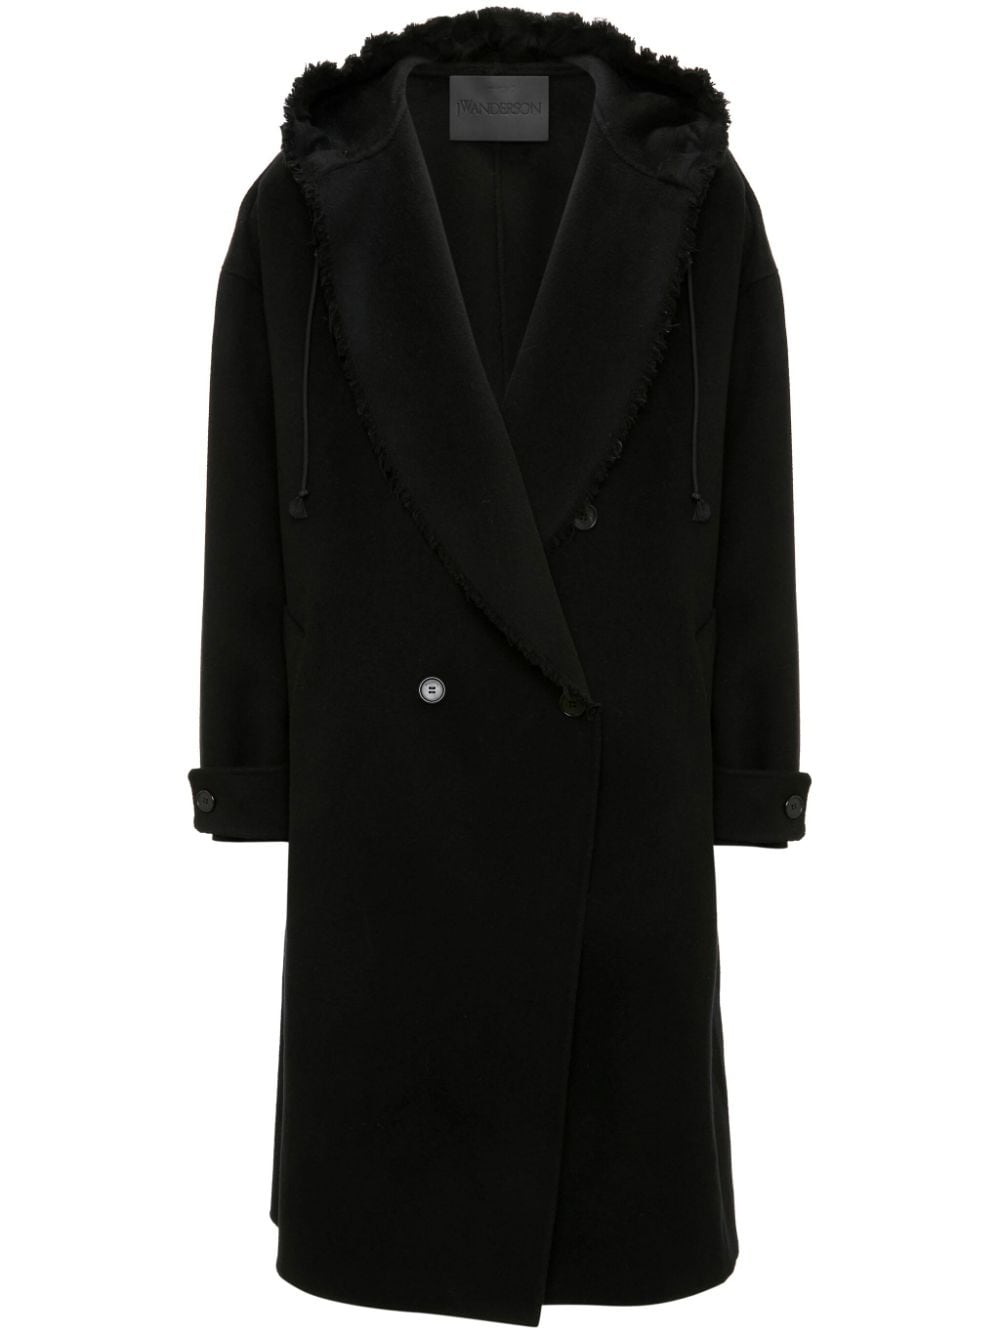 JW Anderson double-breasted hooded trench coat - Black